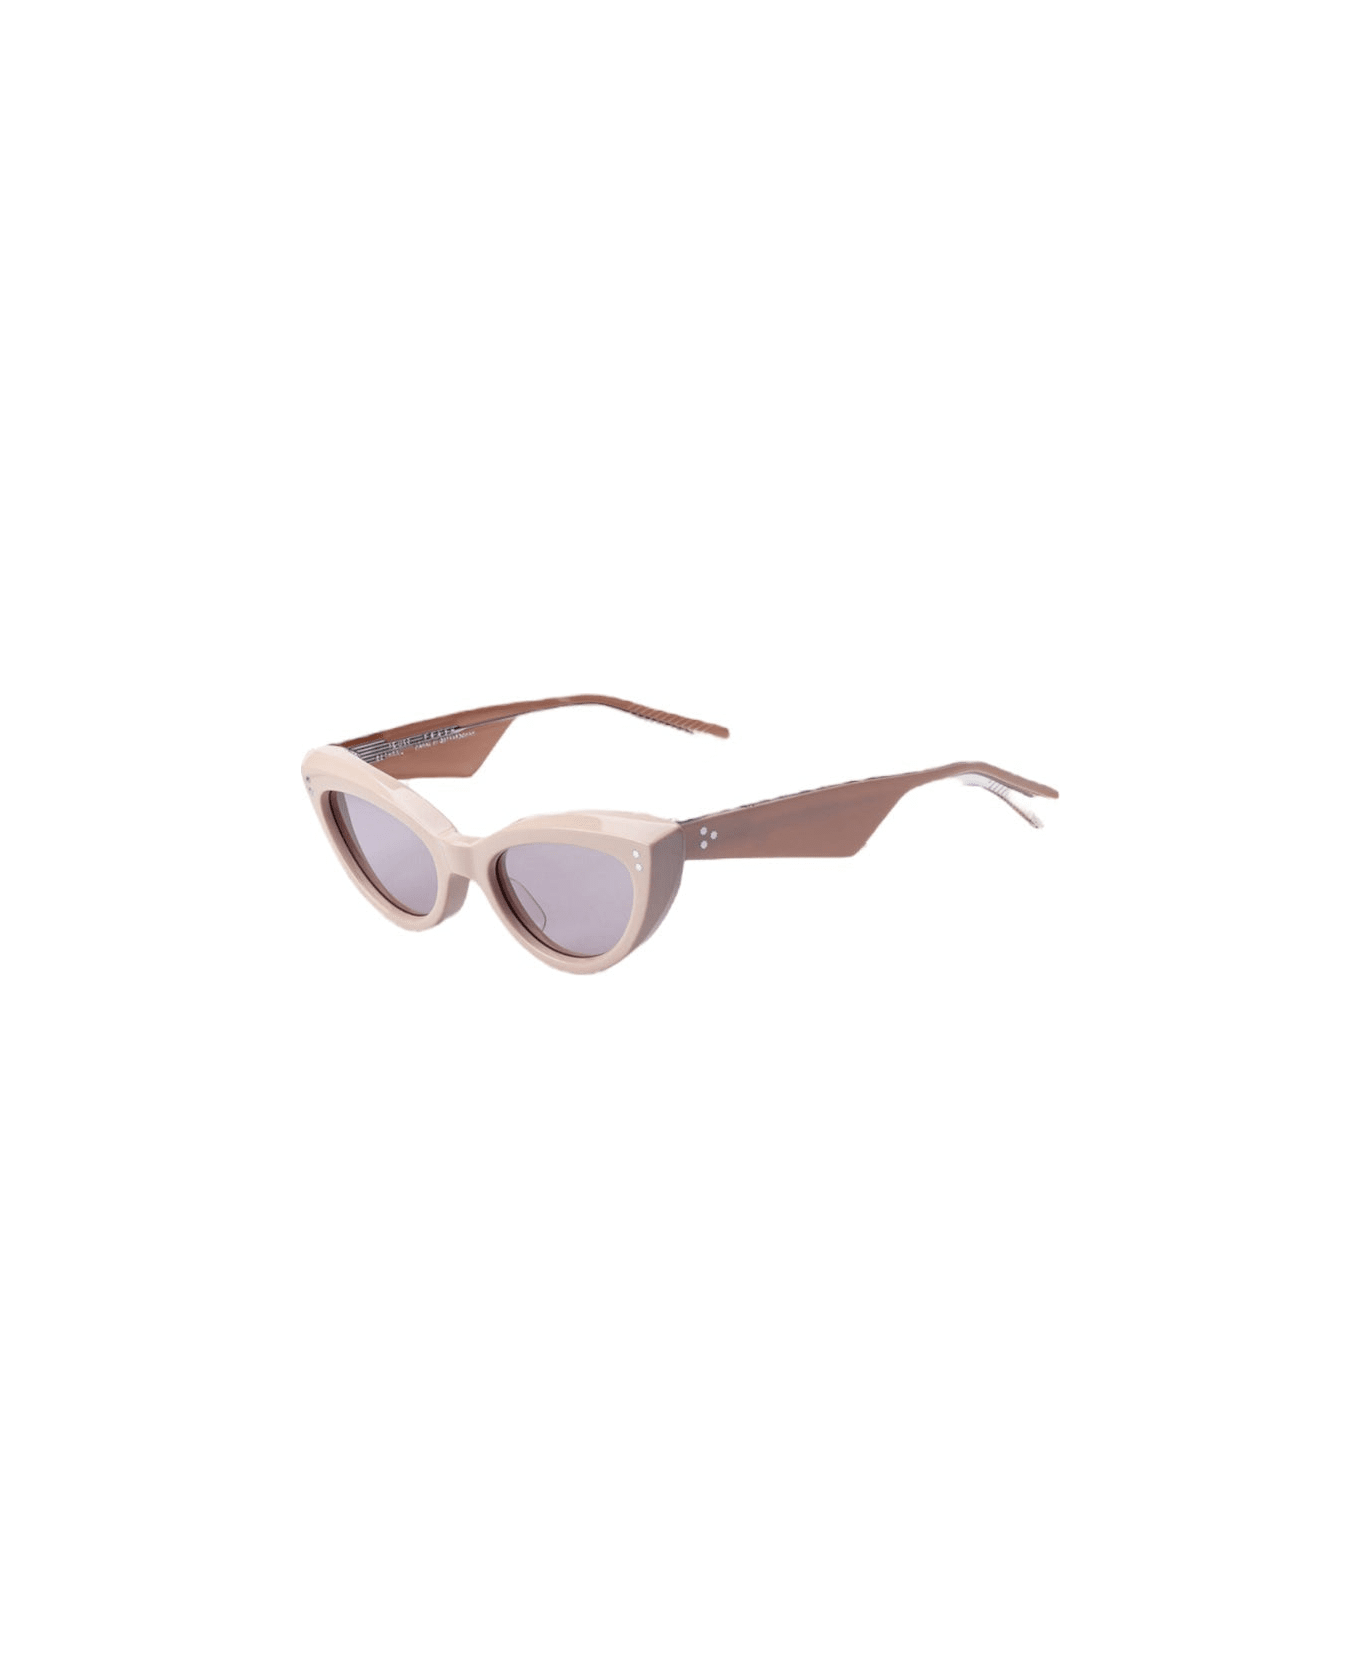 Jacques Marie Mage Heart - Nude Light Pink Sunglasses サングラス